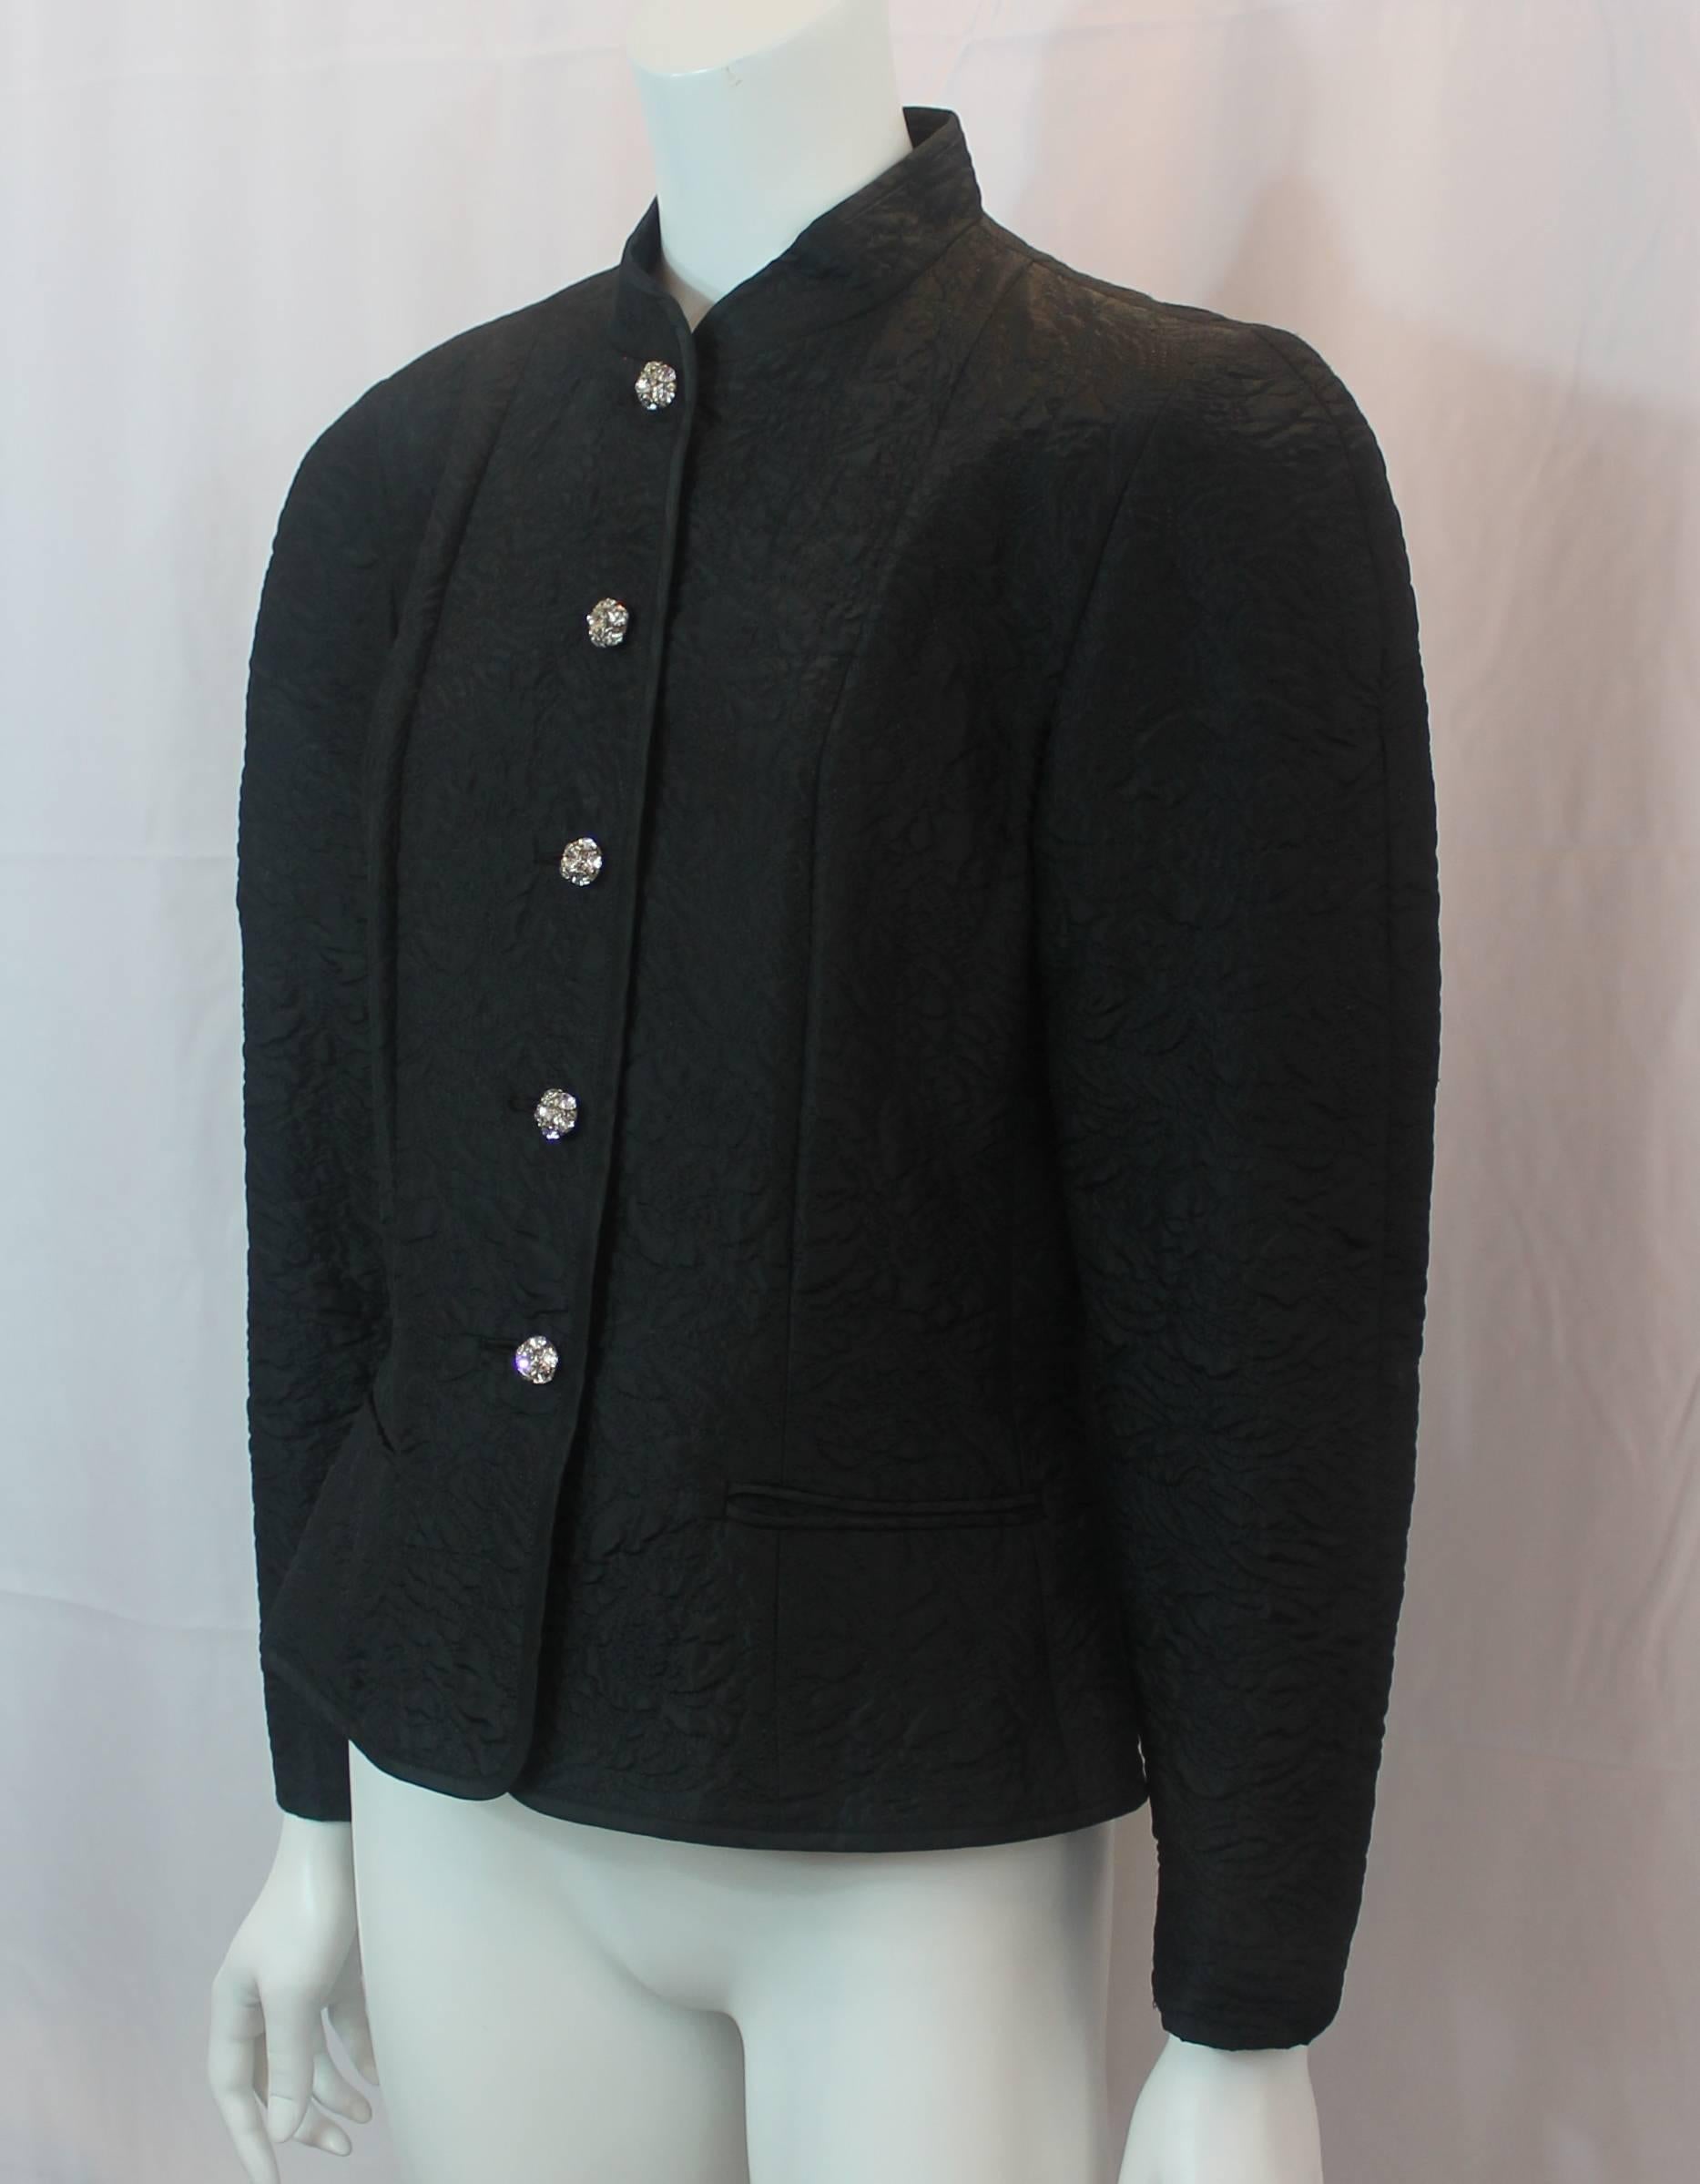 The 80's is back with this Guy Laroche Vintage Black Silk Blend Evening Jacket - 40 - circa 1980s. This vintage evening jacket has a quilted design, 2 sealed front pockets, rhinestone buttons, and shoulder pads. It is in excellent vintage condition